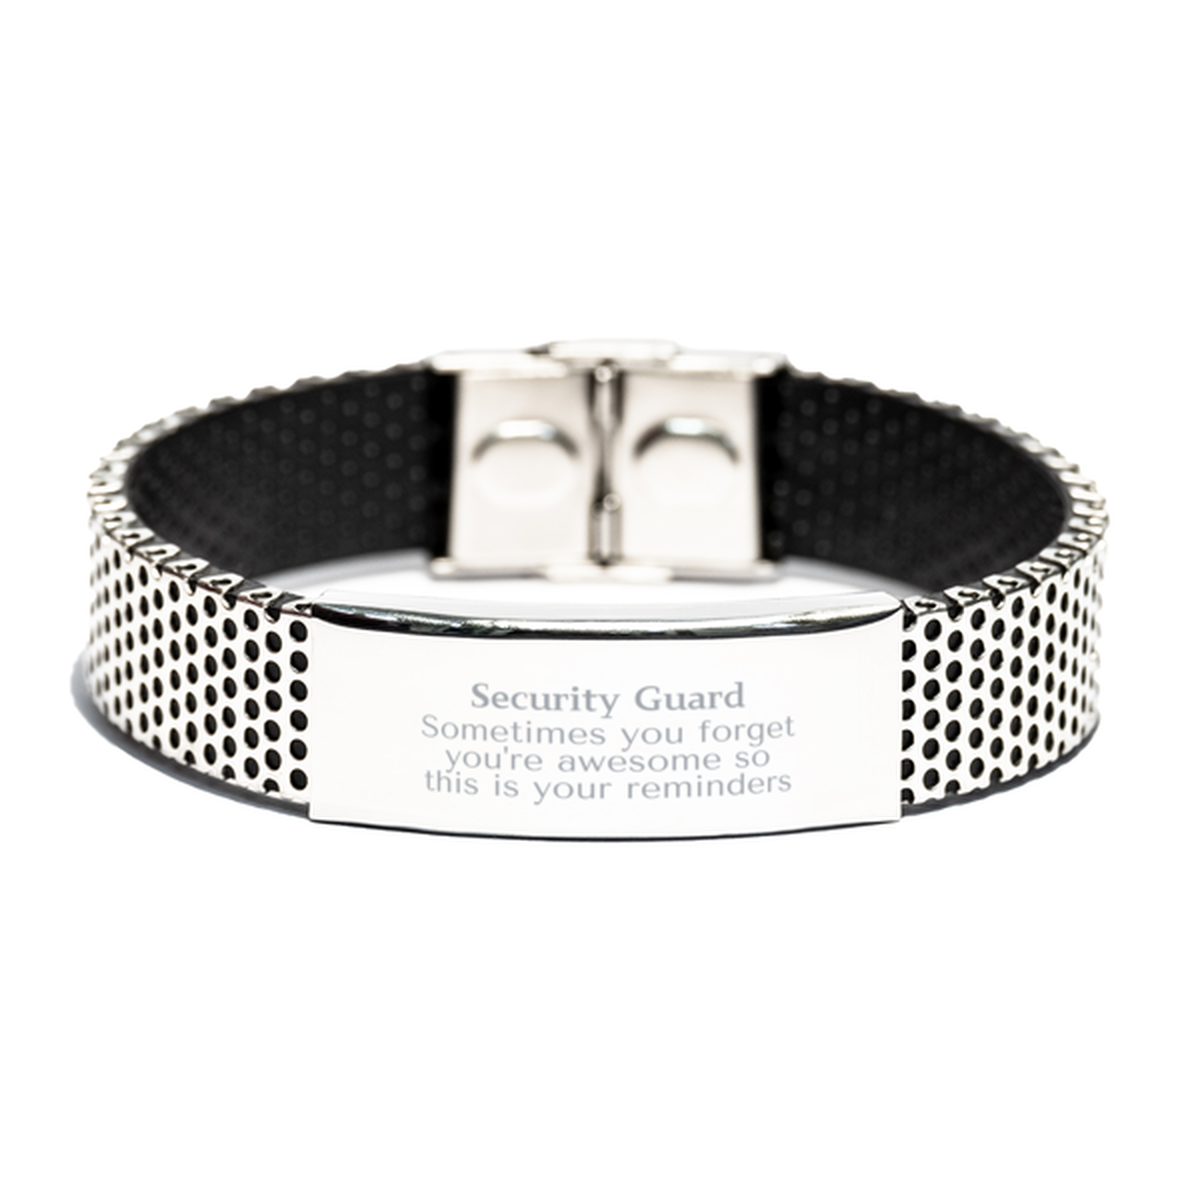 Sentimental Security Guard Stainless Steel Bracelet, Security Guard Sometimes you forget you're awesome so this is your reminders, Graduation Christmas Birthday Gifts for Security Guard, Men, Women, Coworkers